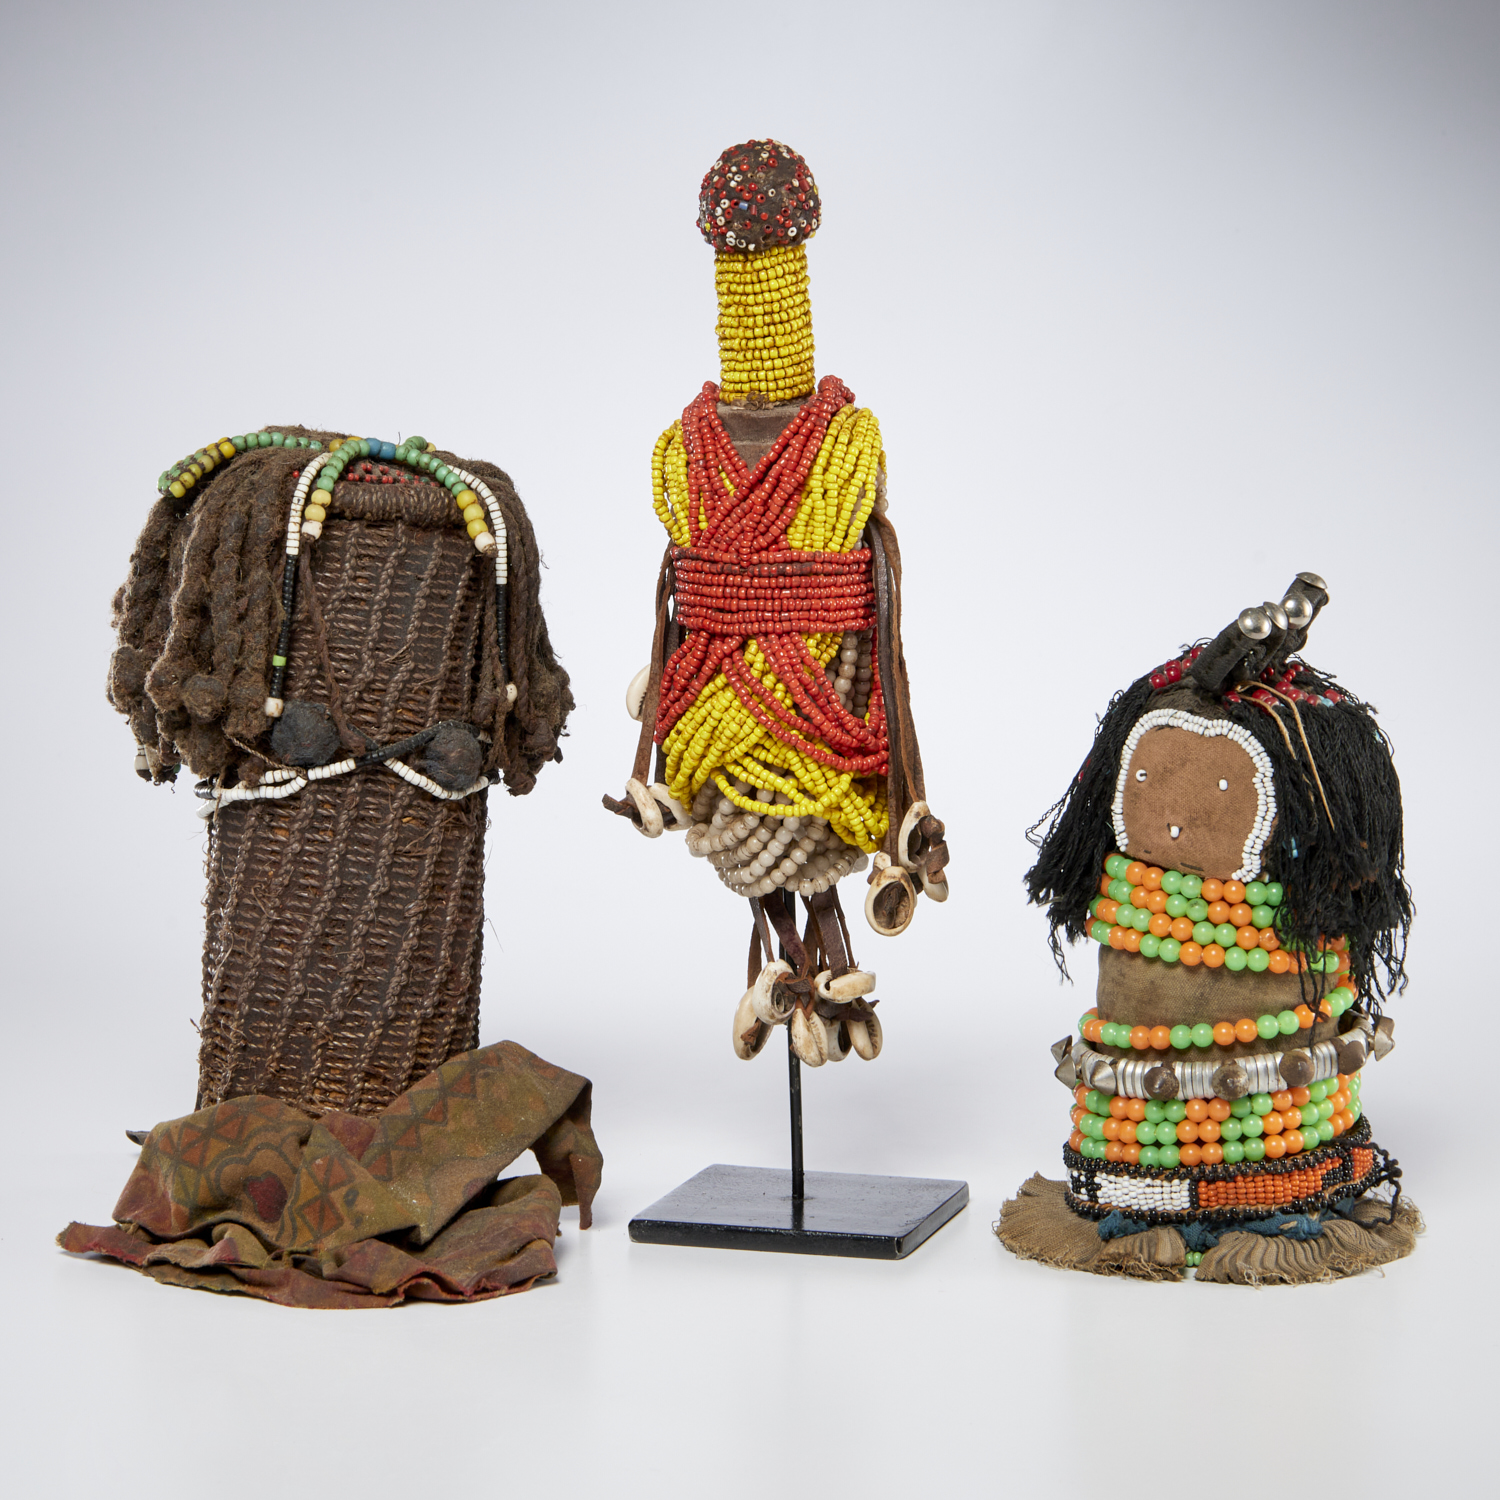  3 WEST AFRICAN BEADED FIGURES  2fb8fa